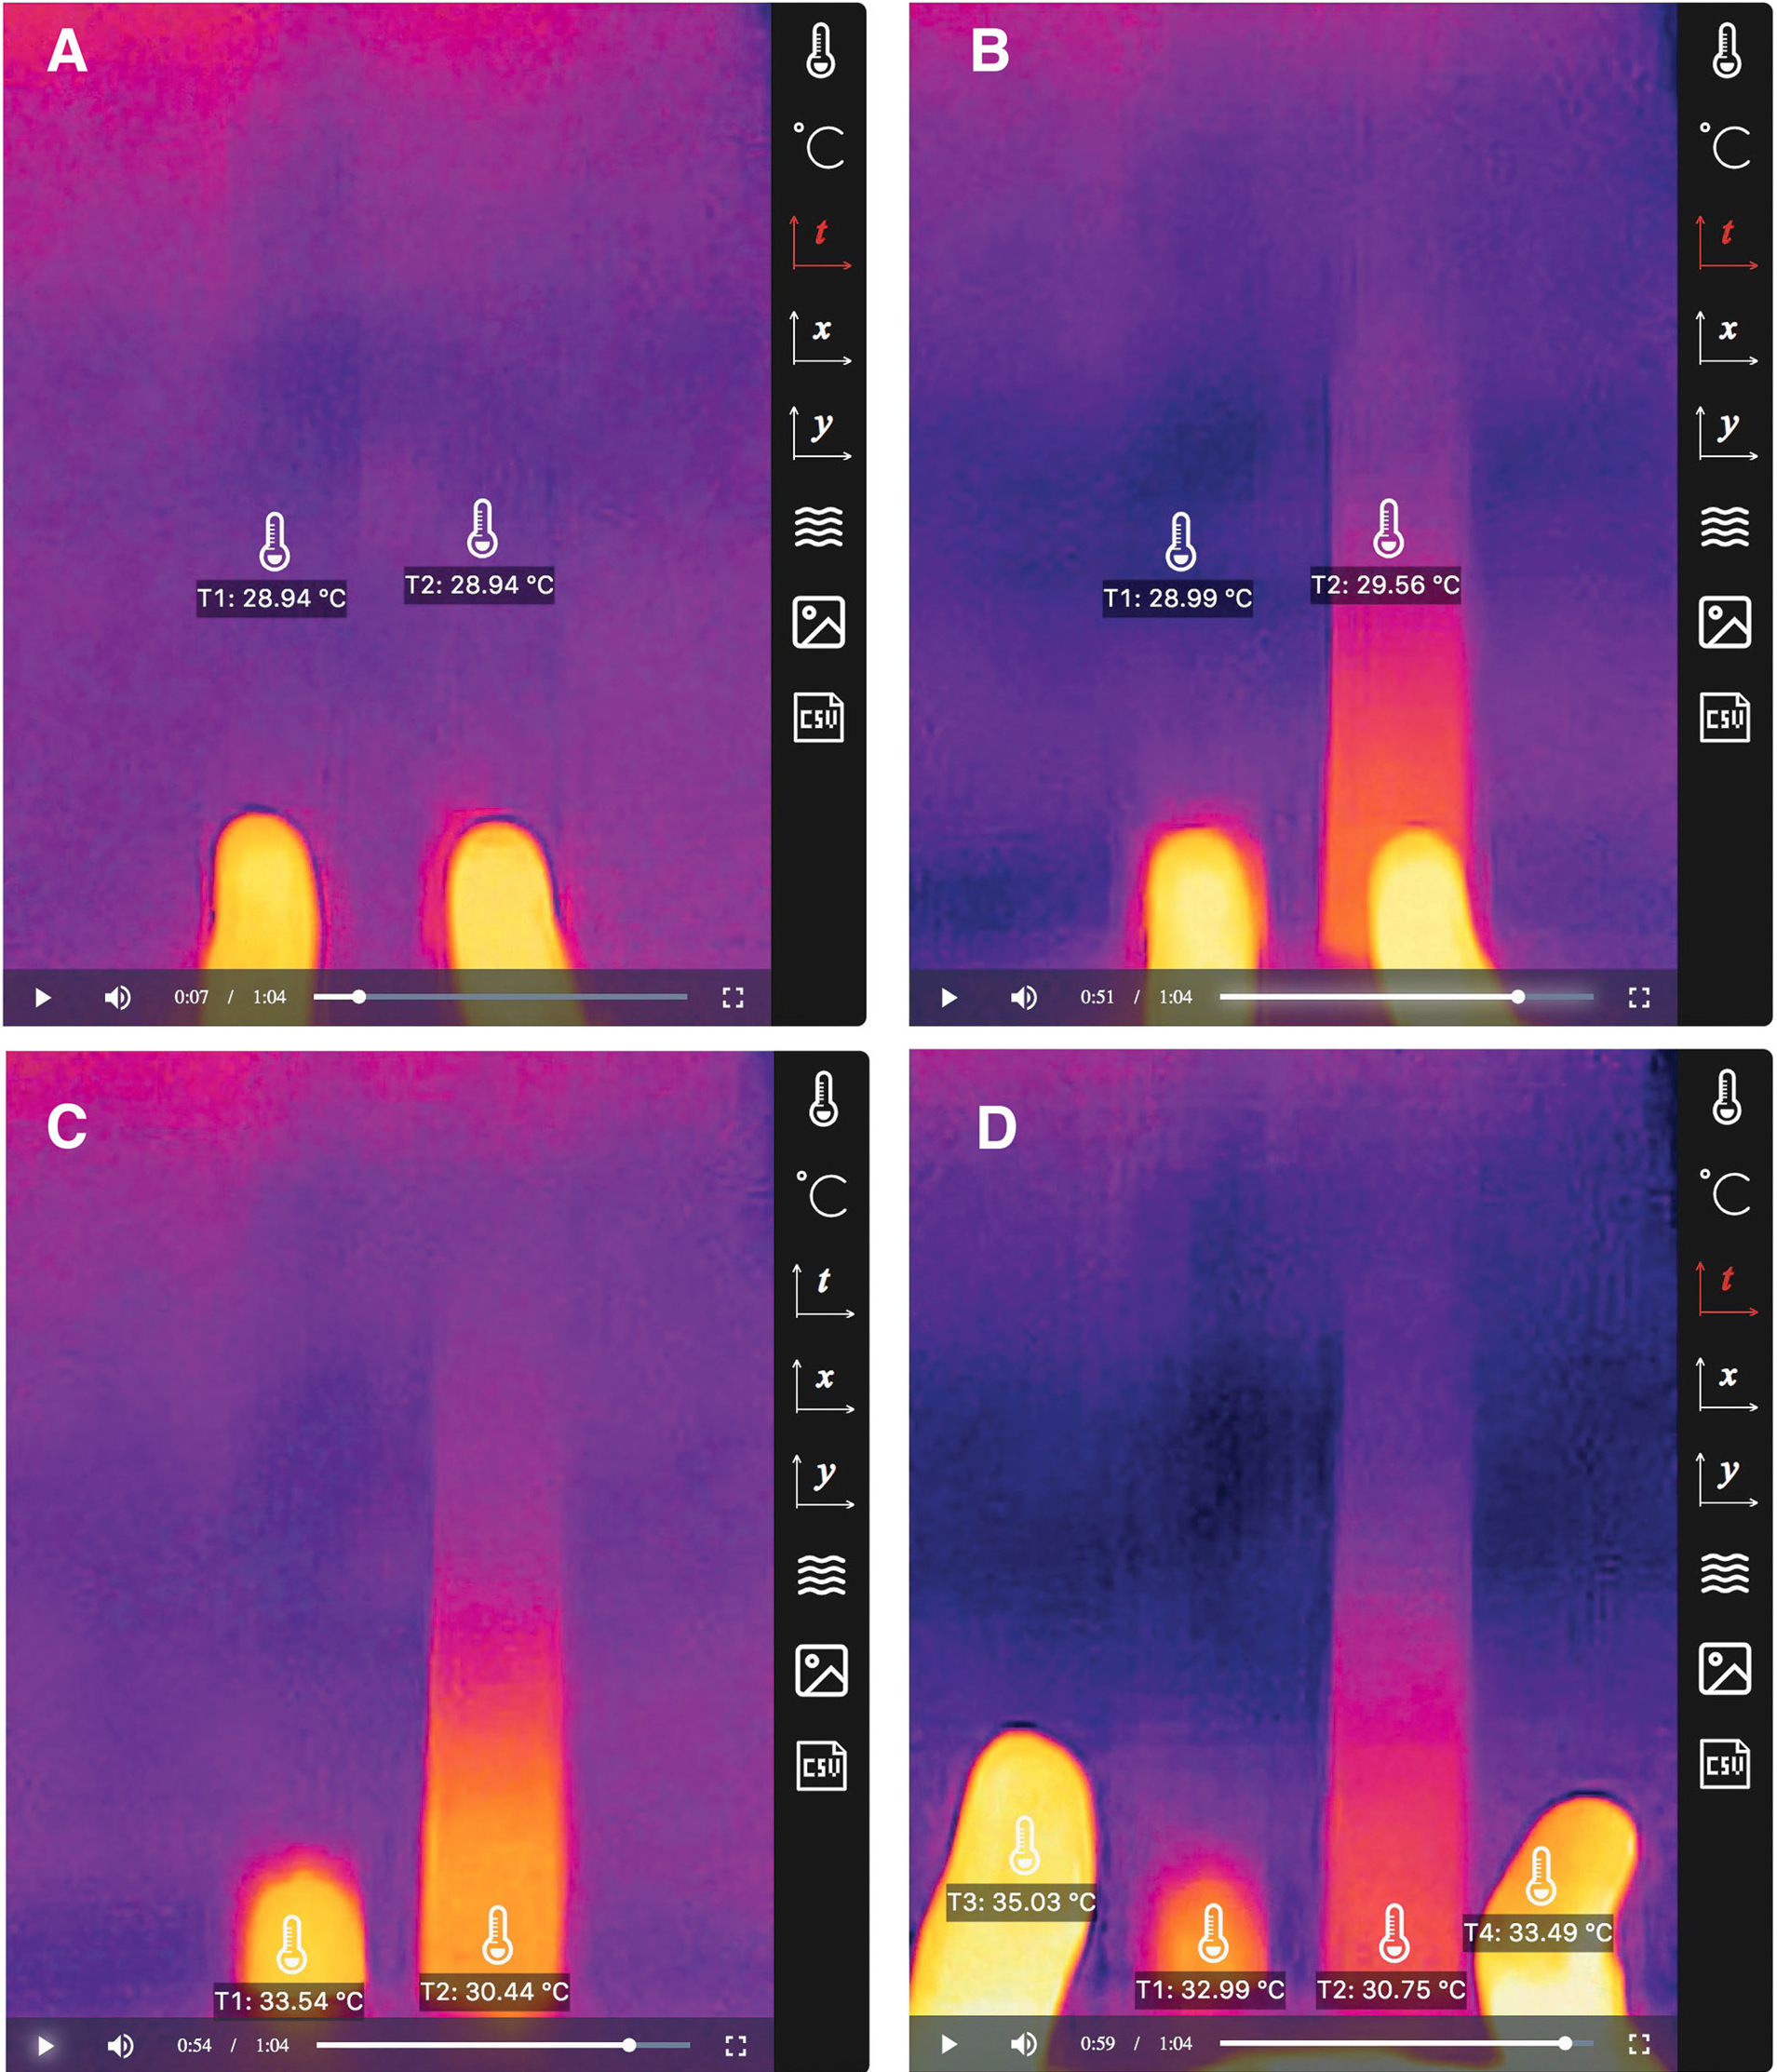 A set of IR images at different times during the thermal conduction experiment showing that (a) the two rulers have the same initial temperature; (b) heat dissipates faster through the metallic ruler after being touched by the thumb; (c) the contact area on the wooden ruler has a higher temperature;  (d) the thumb that has touched the metallic ruler has a lower temperature.